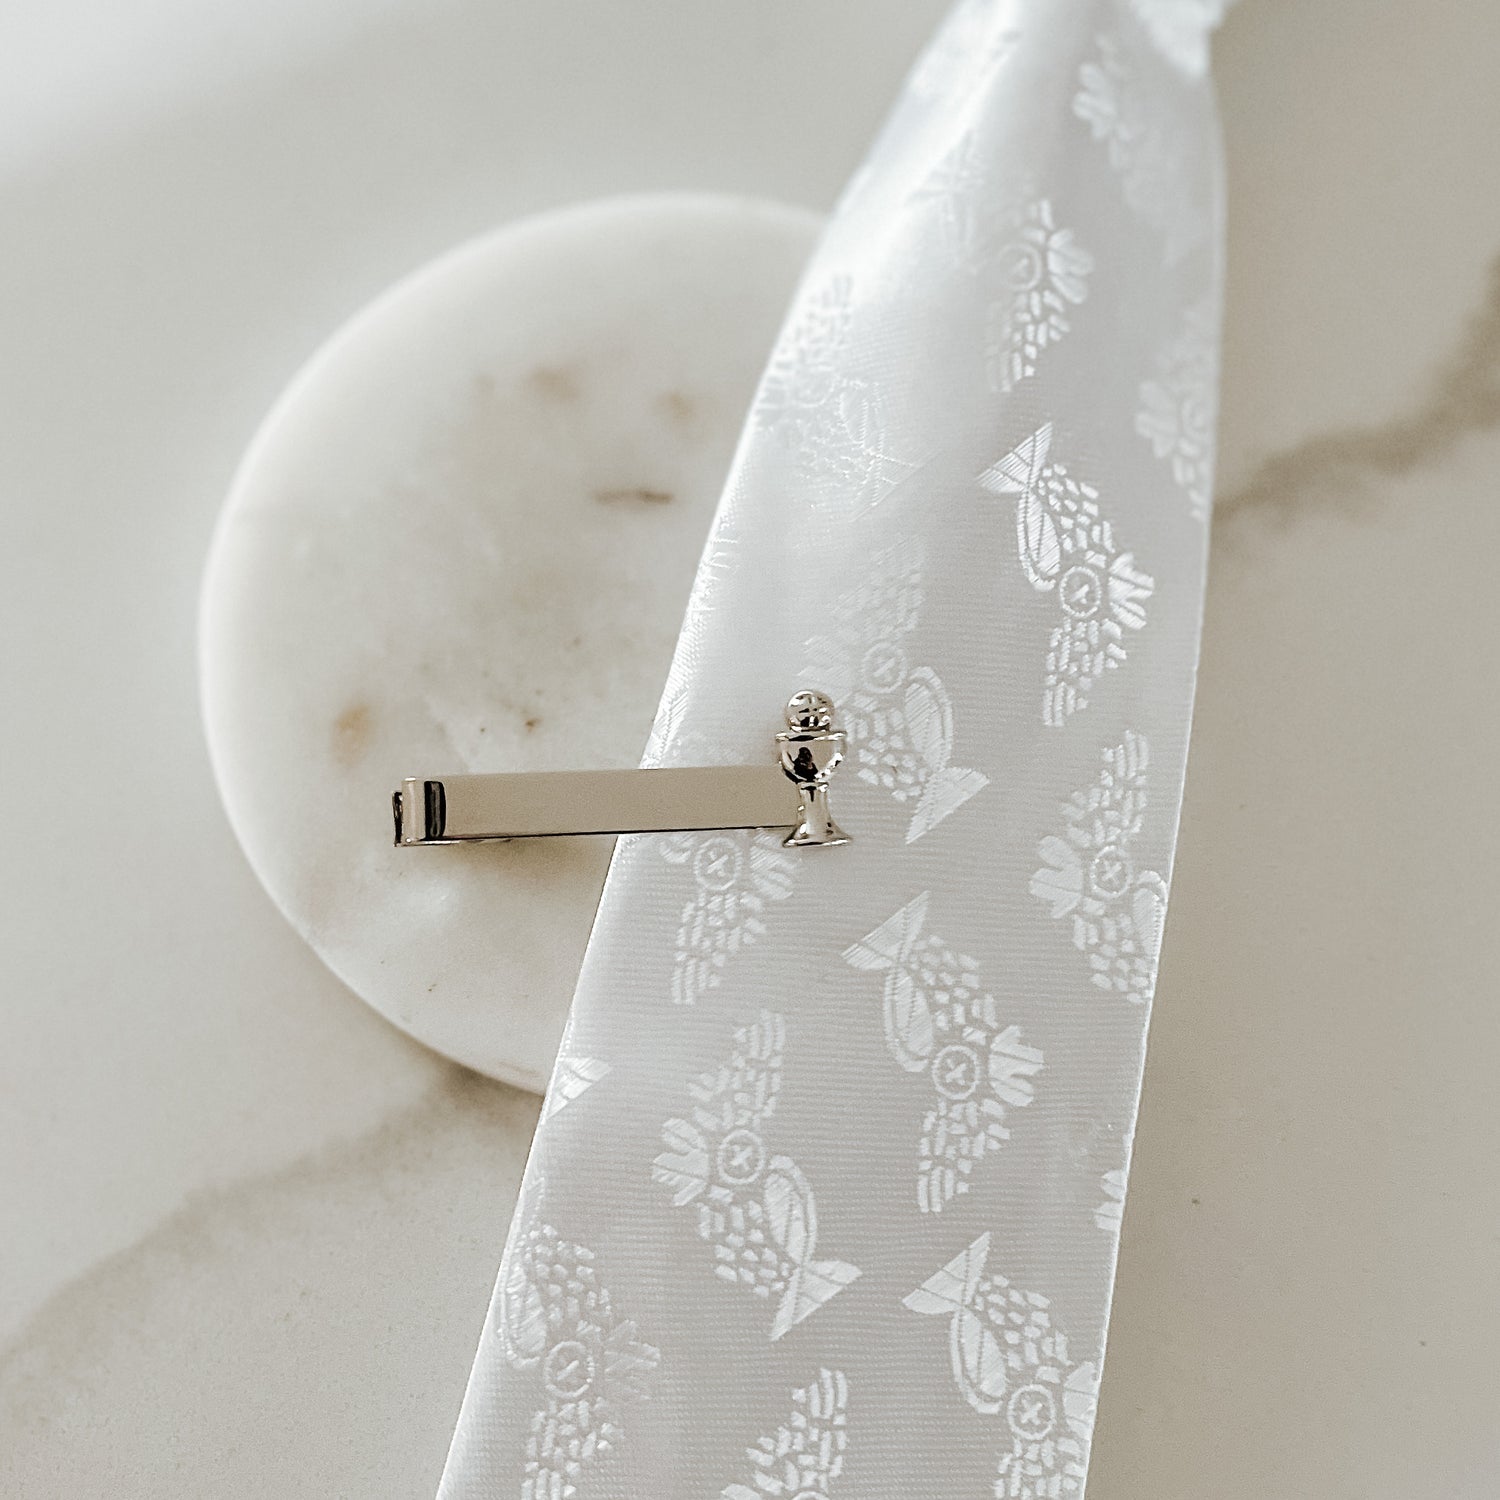 First Communion Set for Boys - Tie with Tie Clip